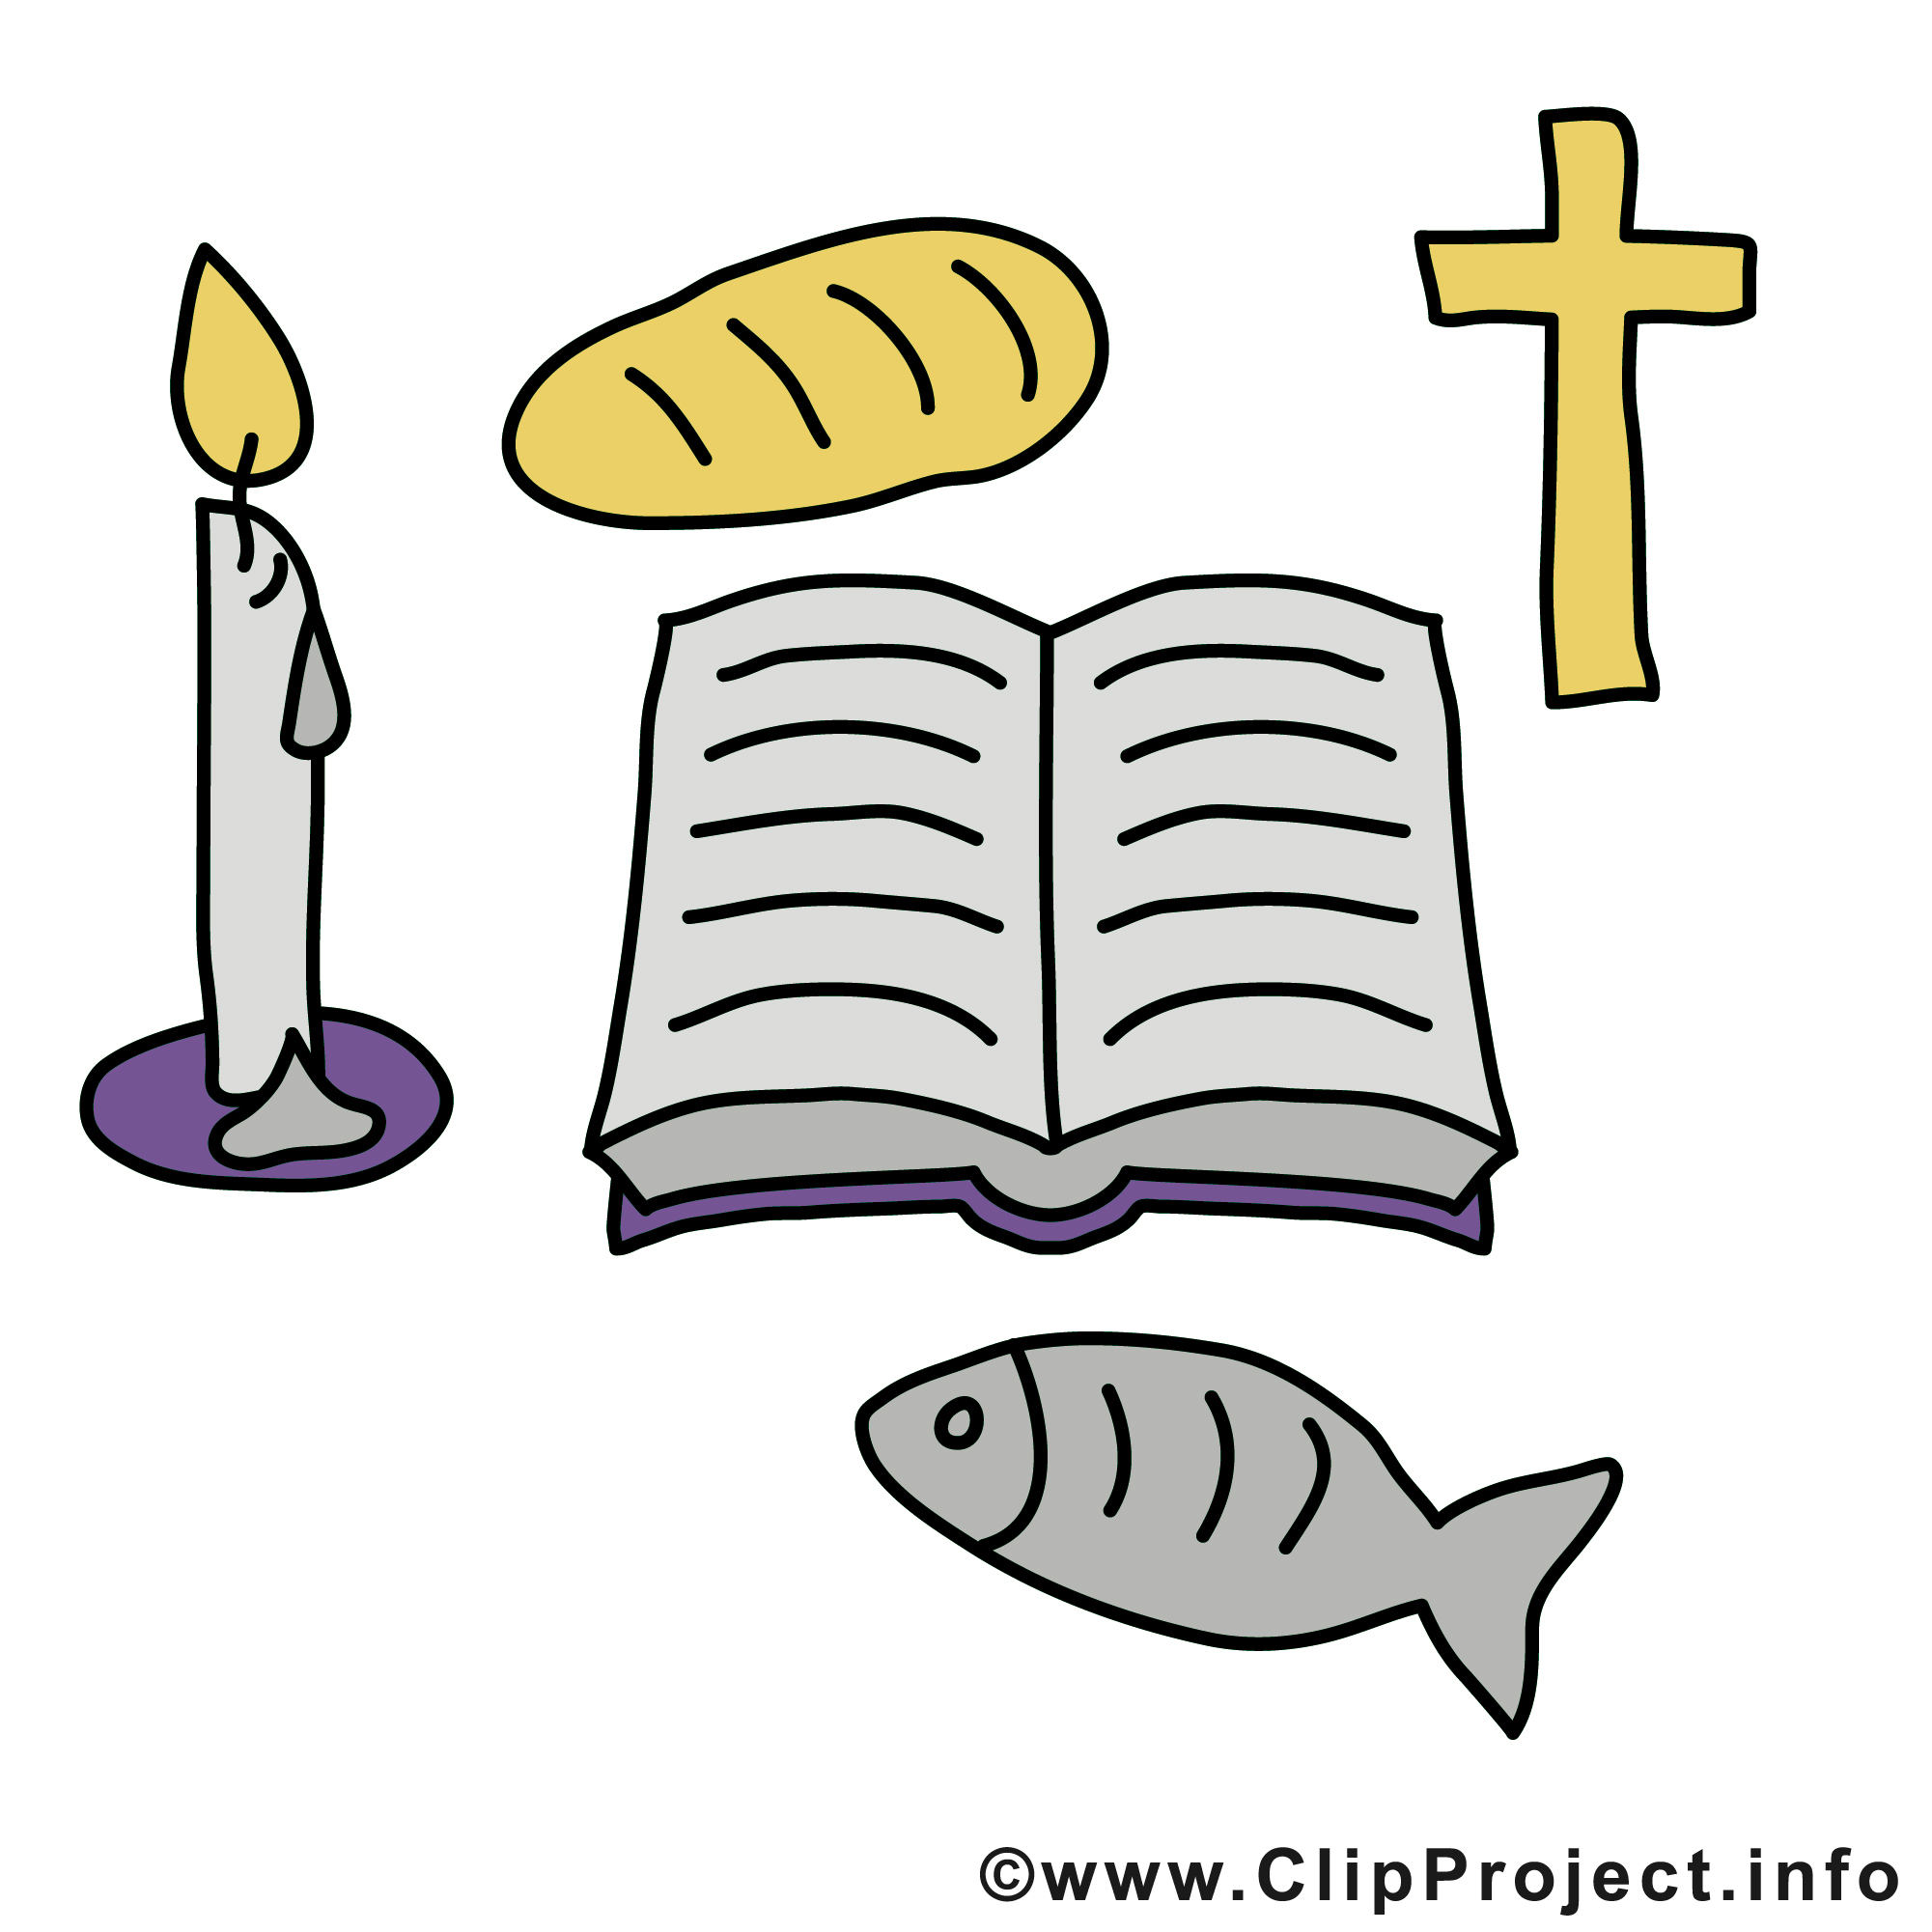 free clipart images religion - photo #16